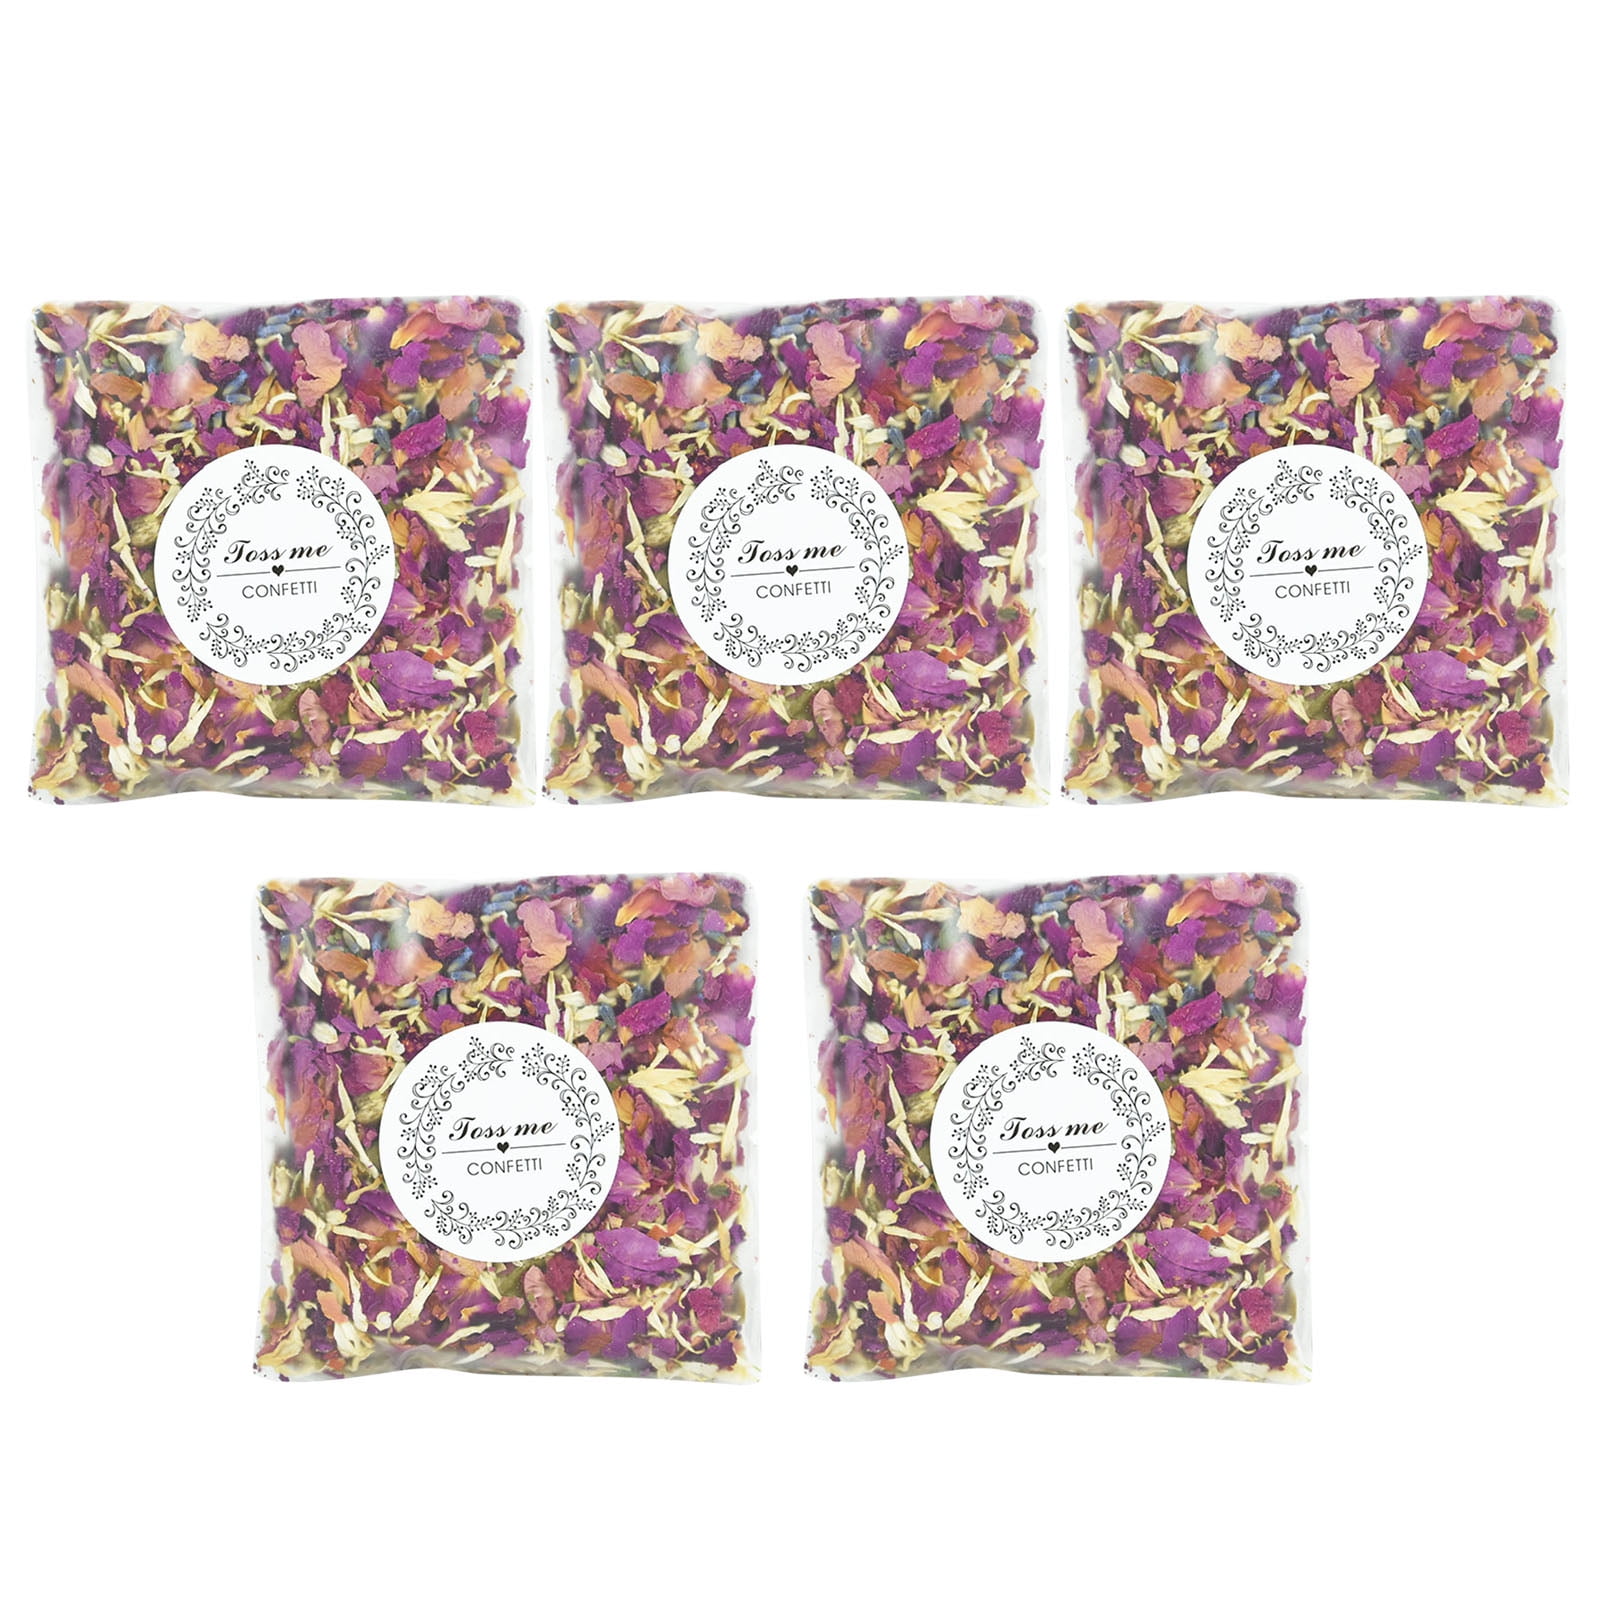 10 Packs Natural Wedding Confetti Throwing Dried Flower Petals